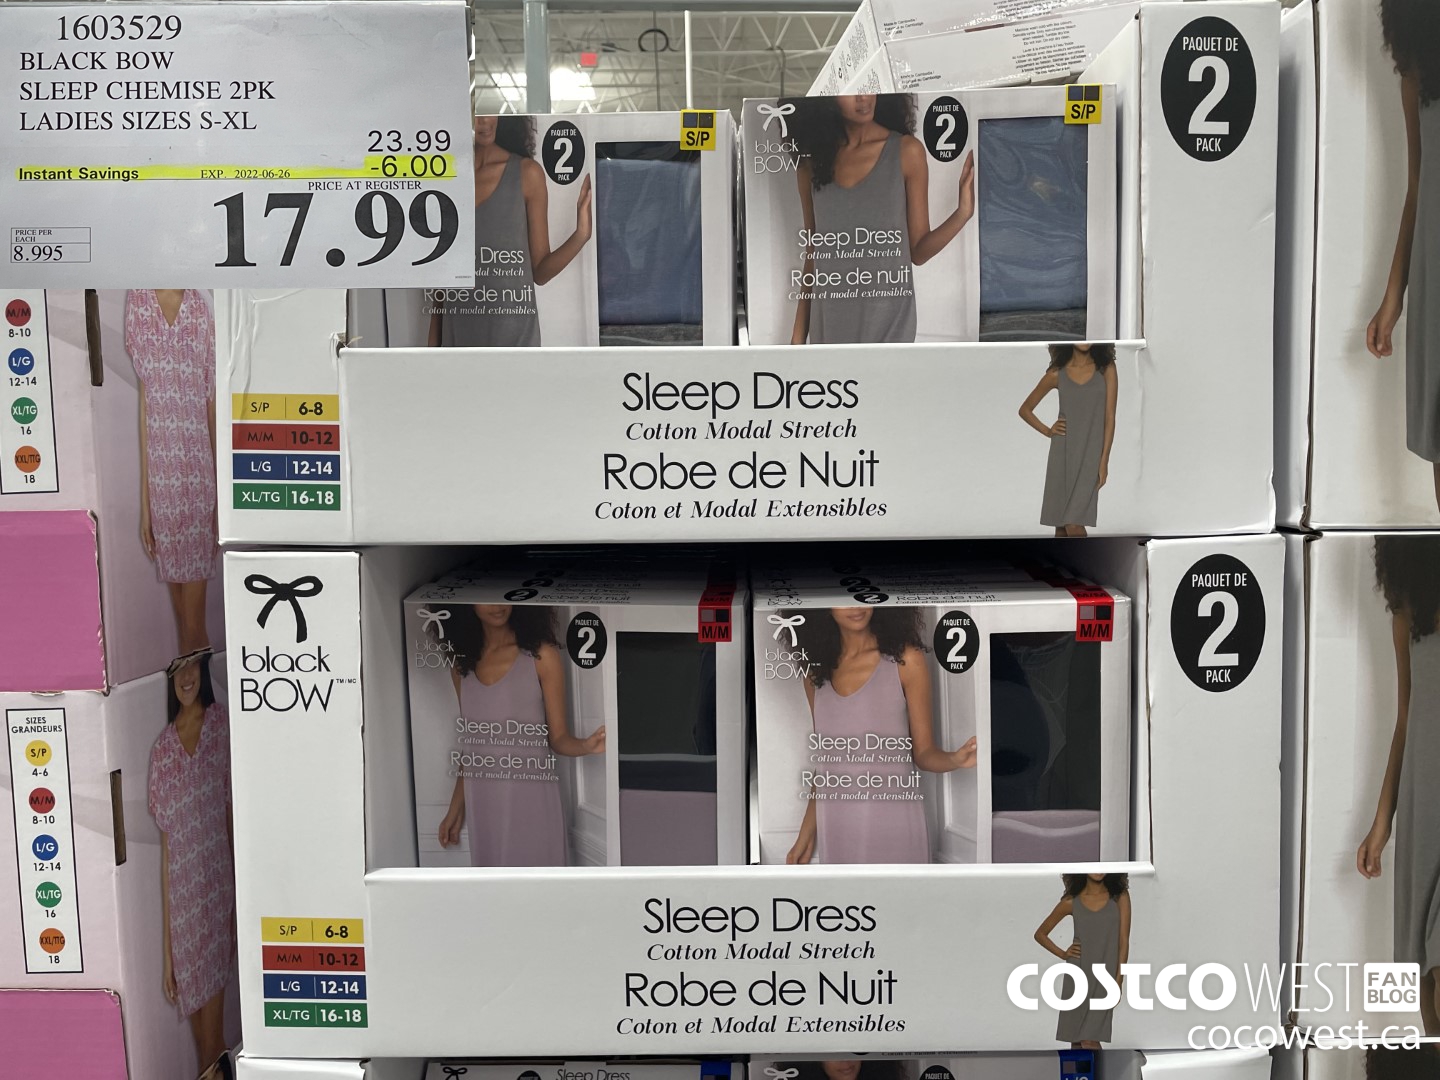 Weekend Update! – Costco Sale Items for June 24-26, 2022 for BC